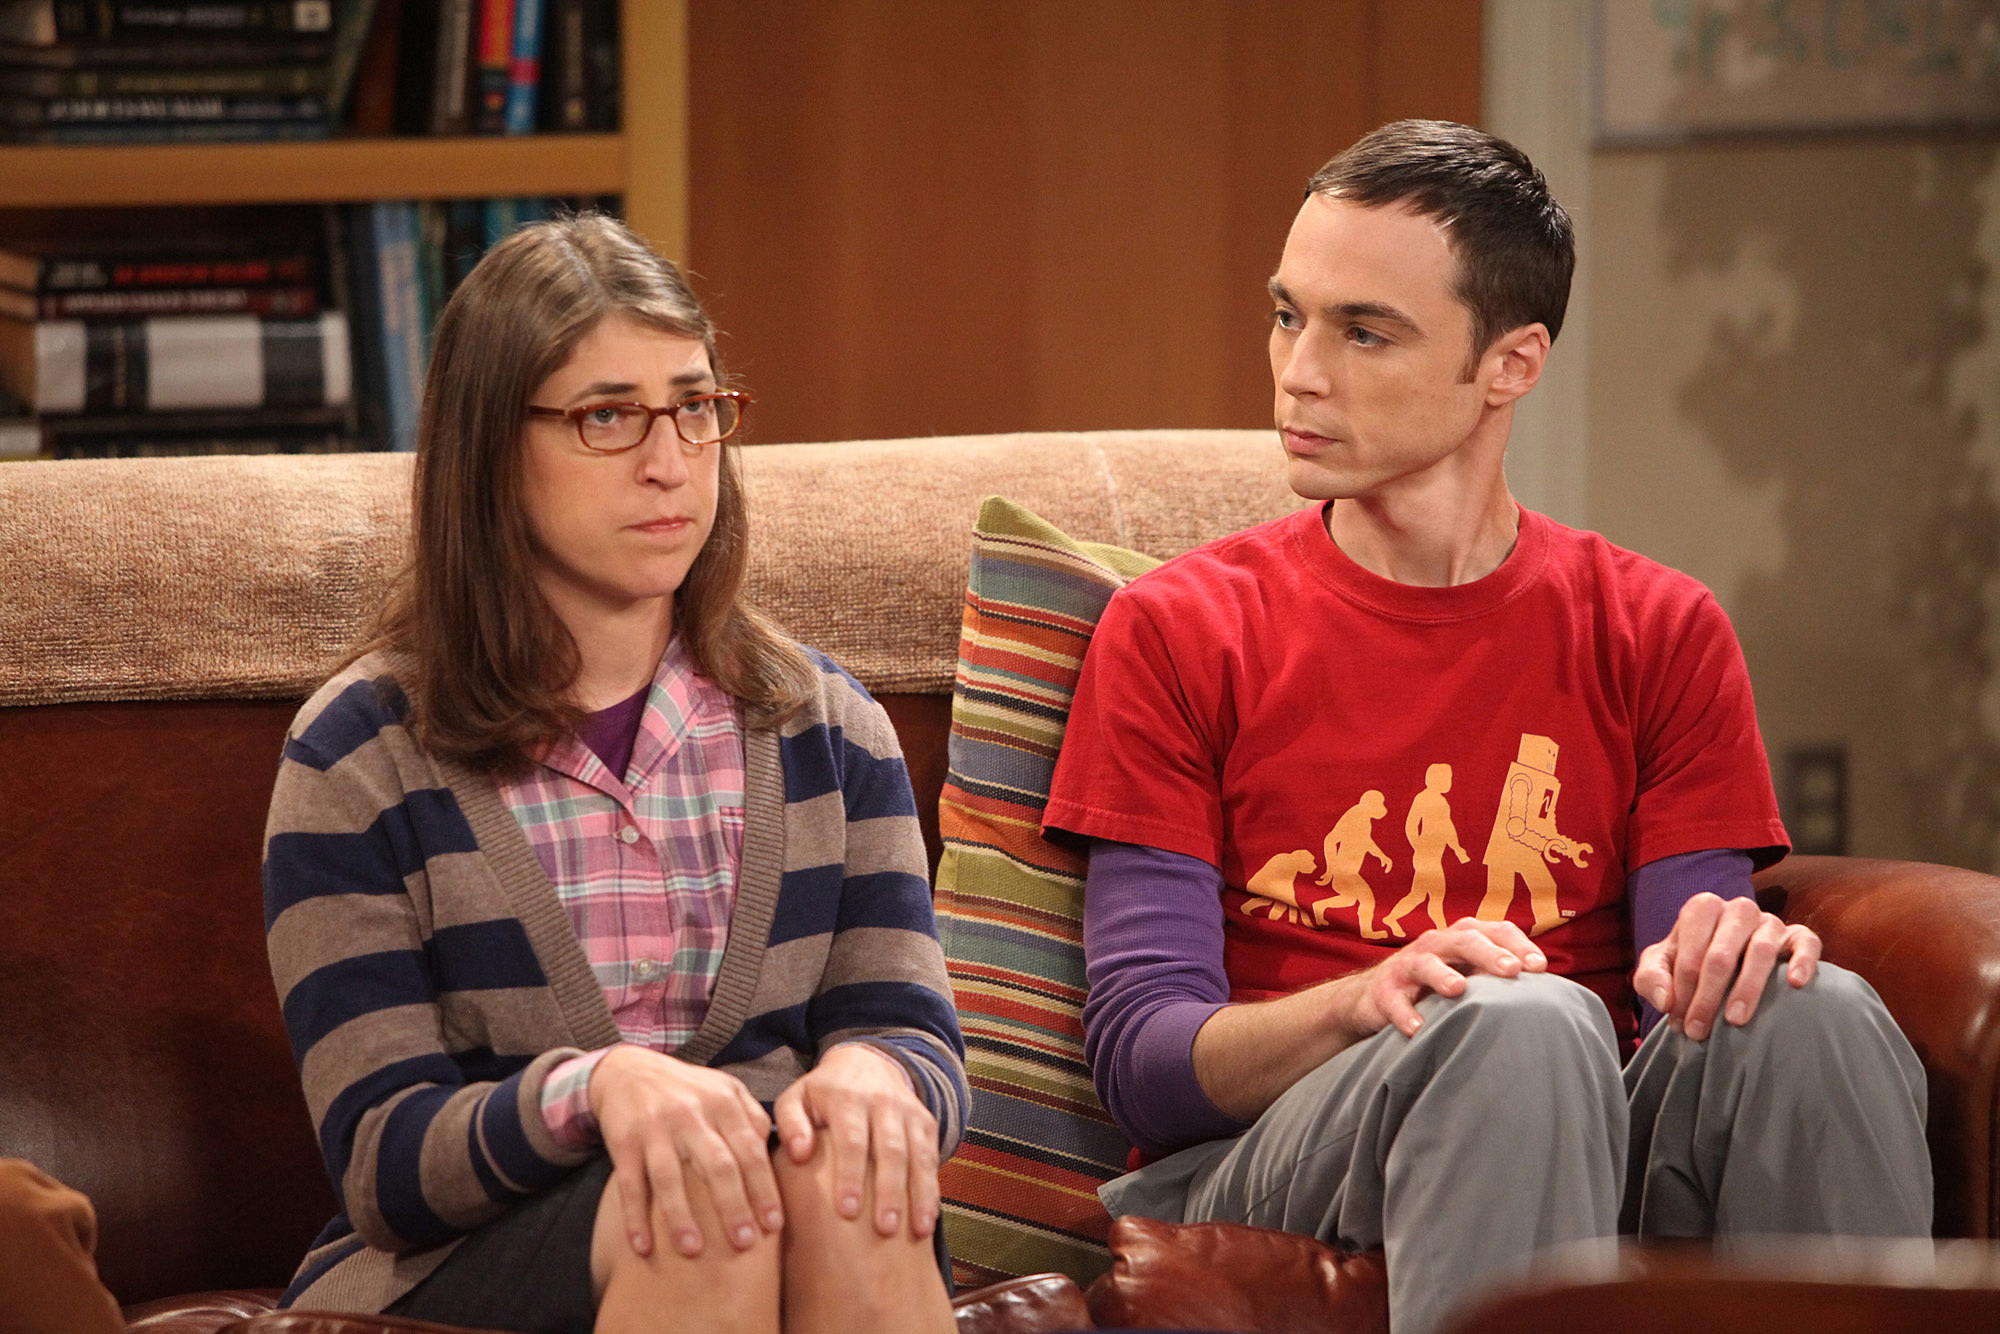 Mayim Bialik and Jim Parsons on "Big Bang Theory" on August 23, 2010. | Source: Getty Images